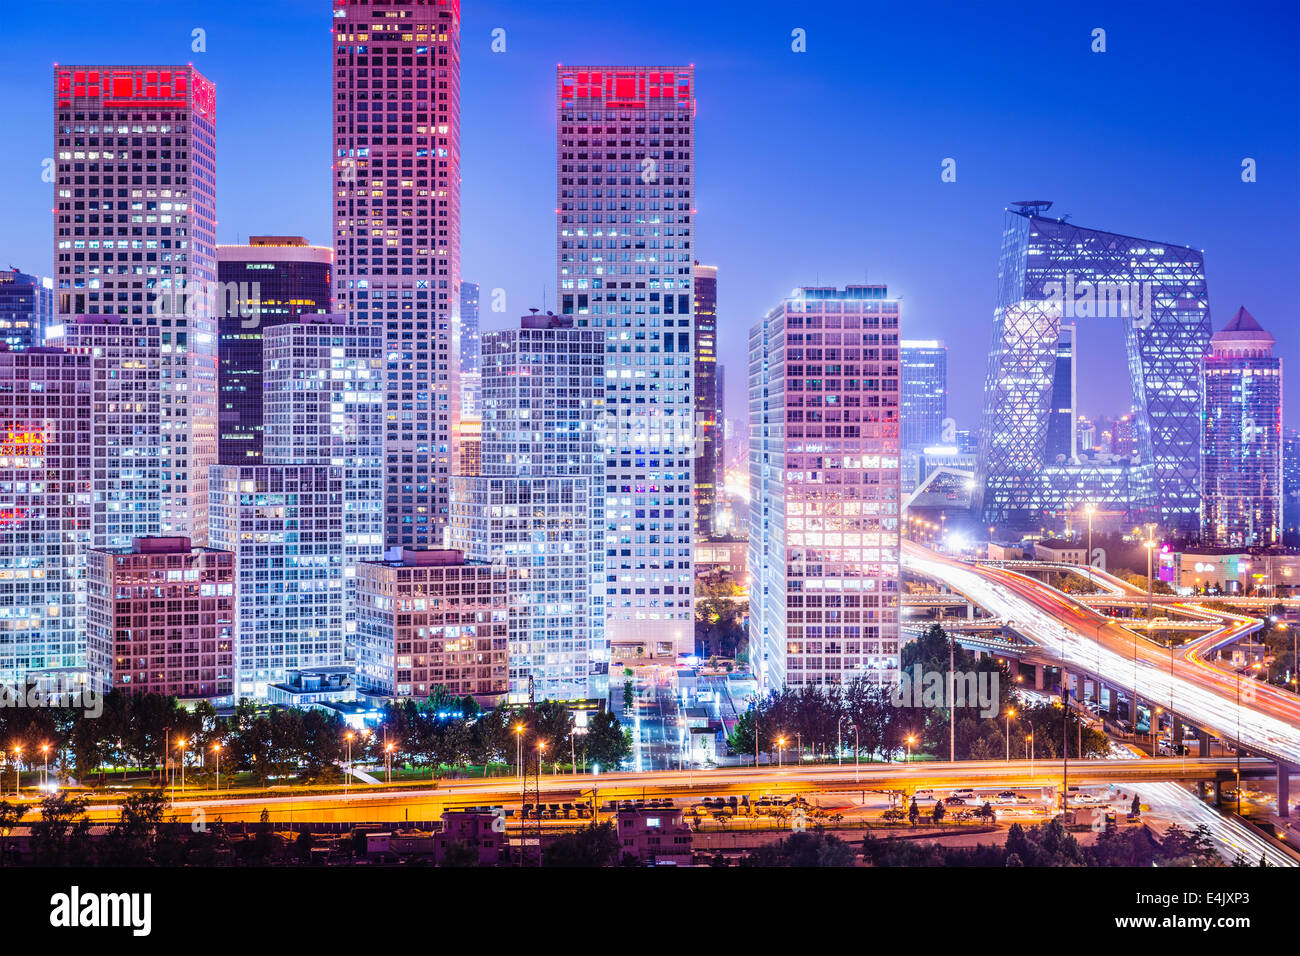 Beijing, China skyline at the central business district. Stock Photo